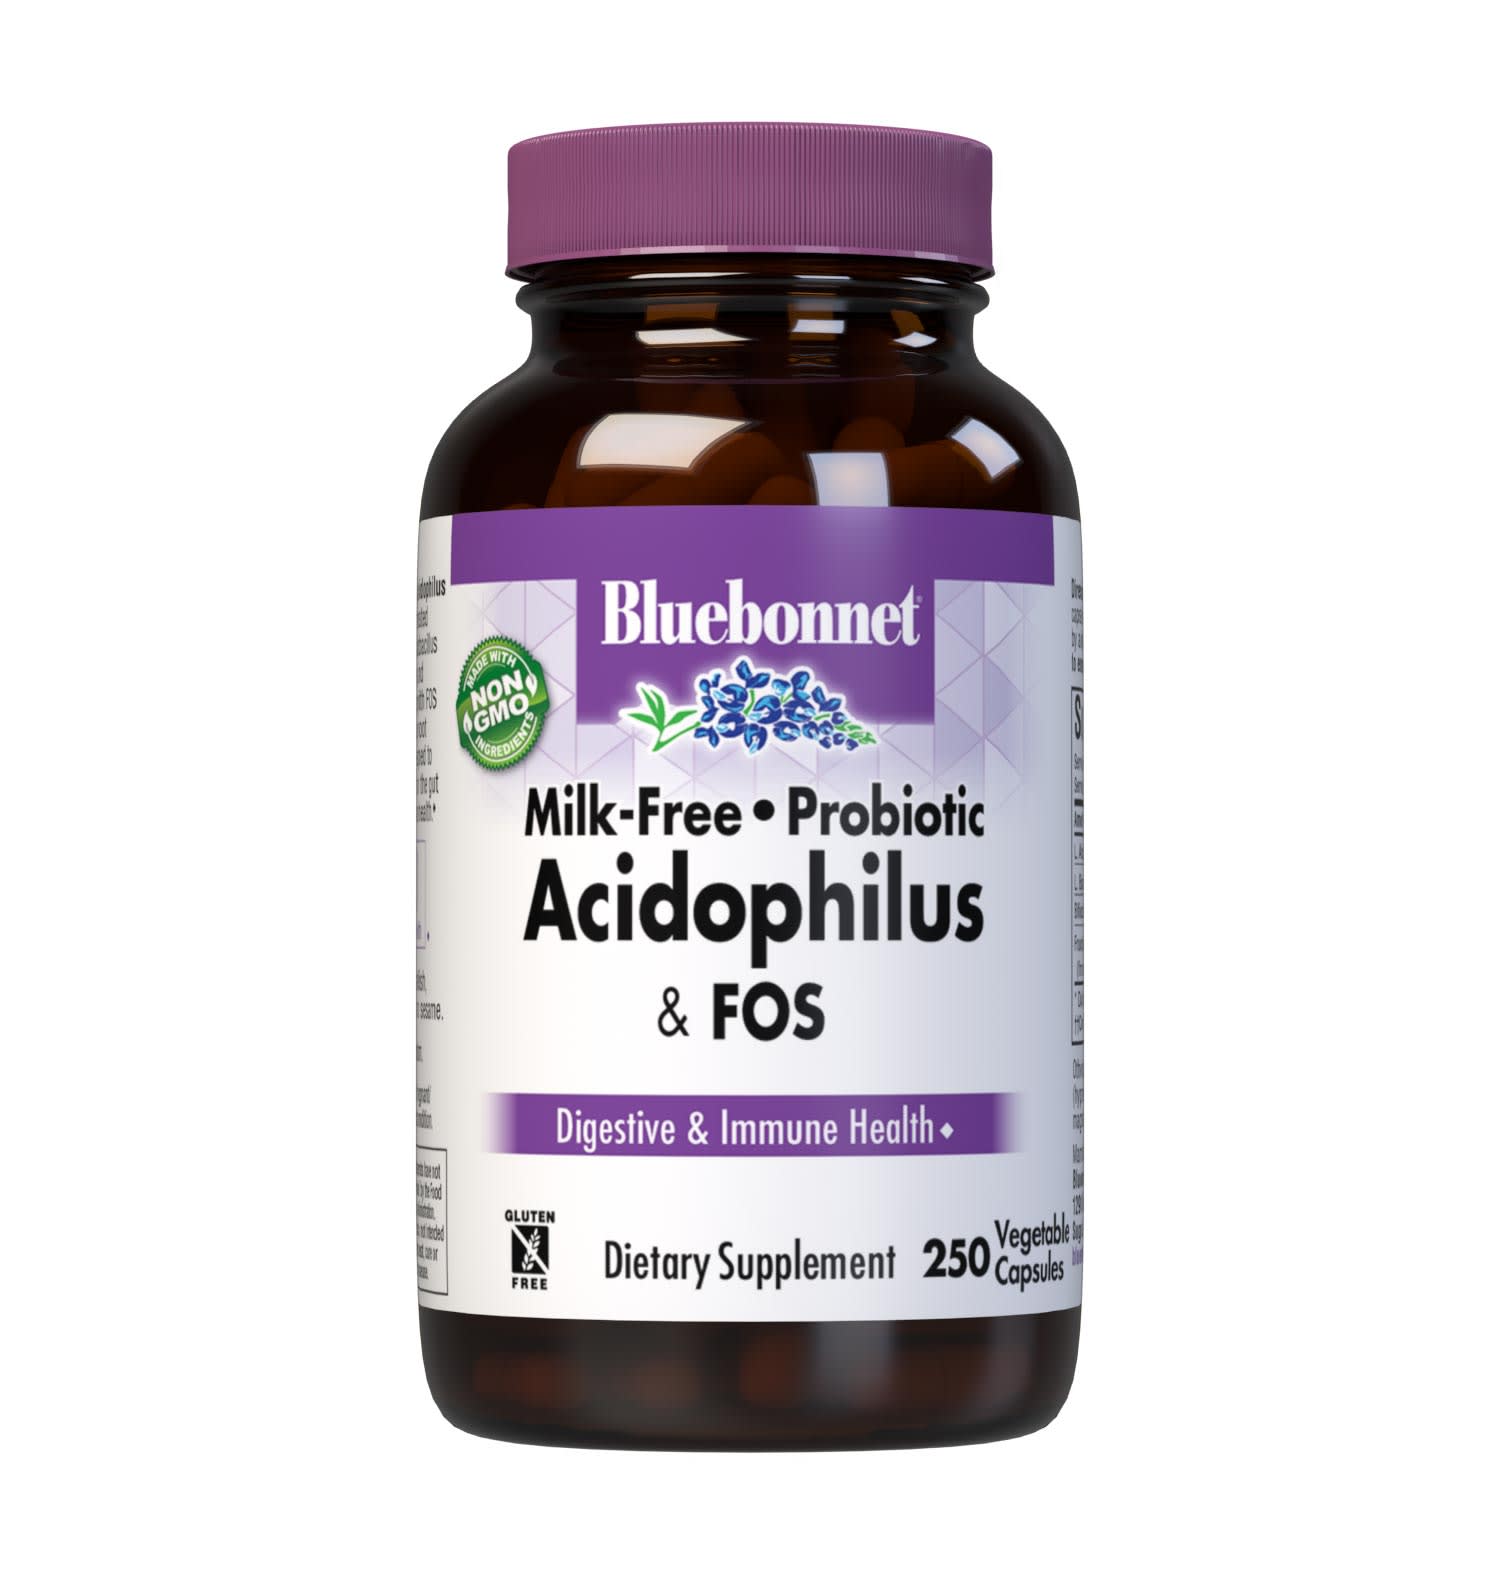 Bluebonnet’s Milk-Free Probiotic Acidophilus & FOS 250 Vegetable Capsules are formulated with over three billion viable cultures from lactobacillus acidophilus, lactobacillus bulgaricus, bifidobacterium bifidum strains along with FOS (fructooligosaccharides) from chicory root extract. This probiotic formula is designed to assist the growth of friendly bacteria in the gut to help support digestive and immune health. #size_250 count